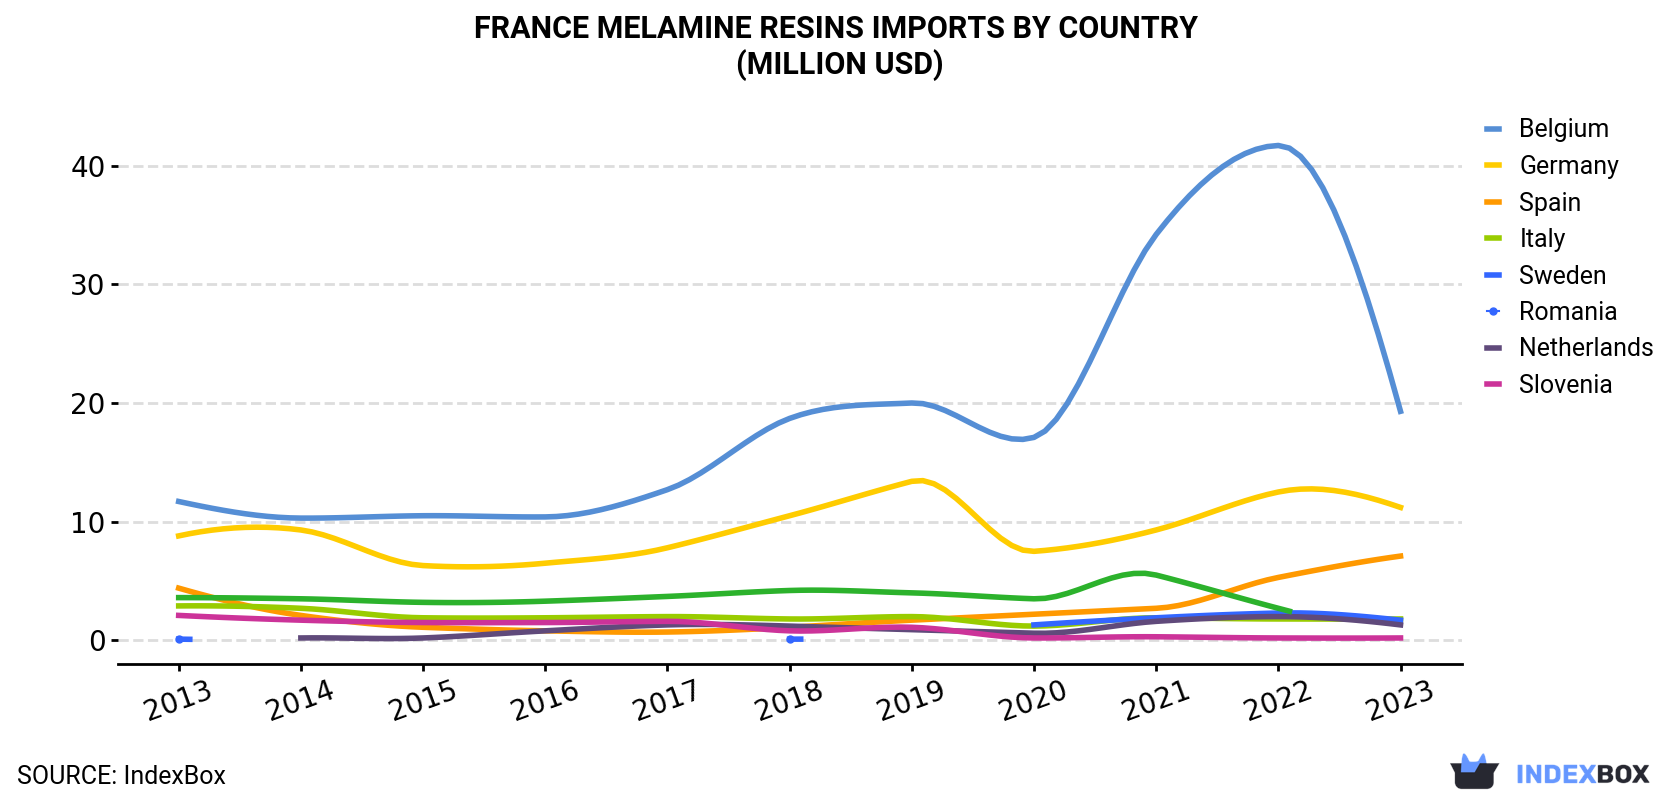 France Melamine Resins Imports By Country (Million USD)